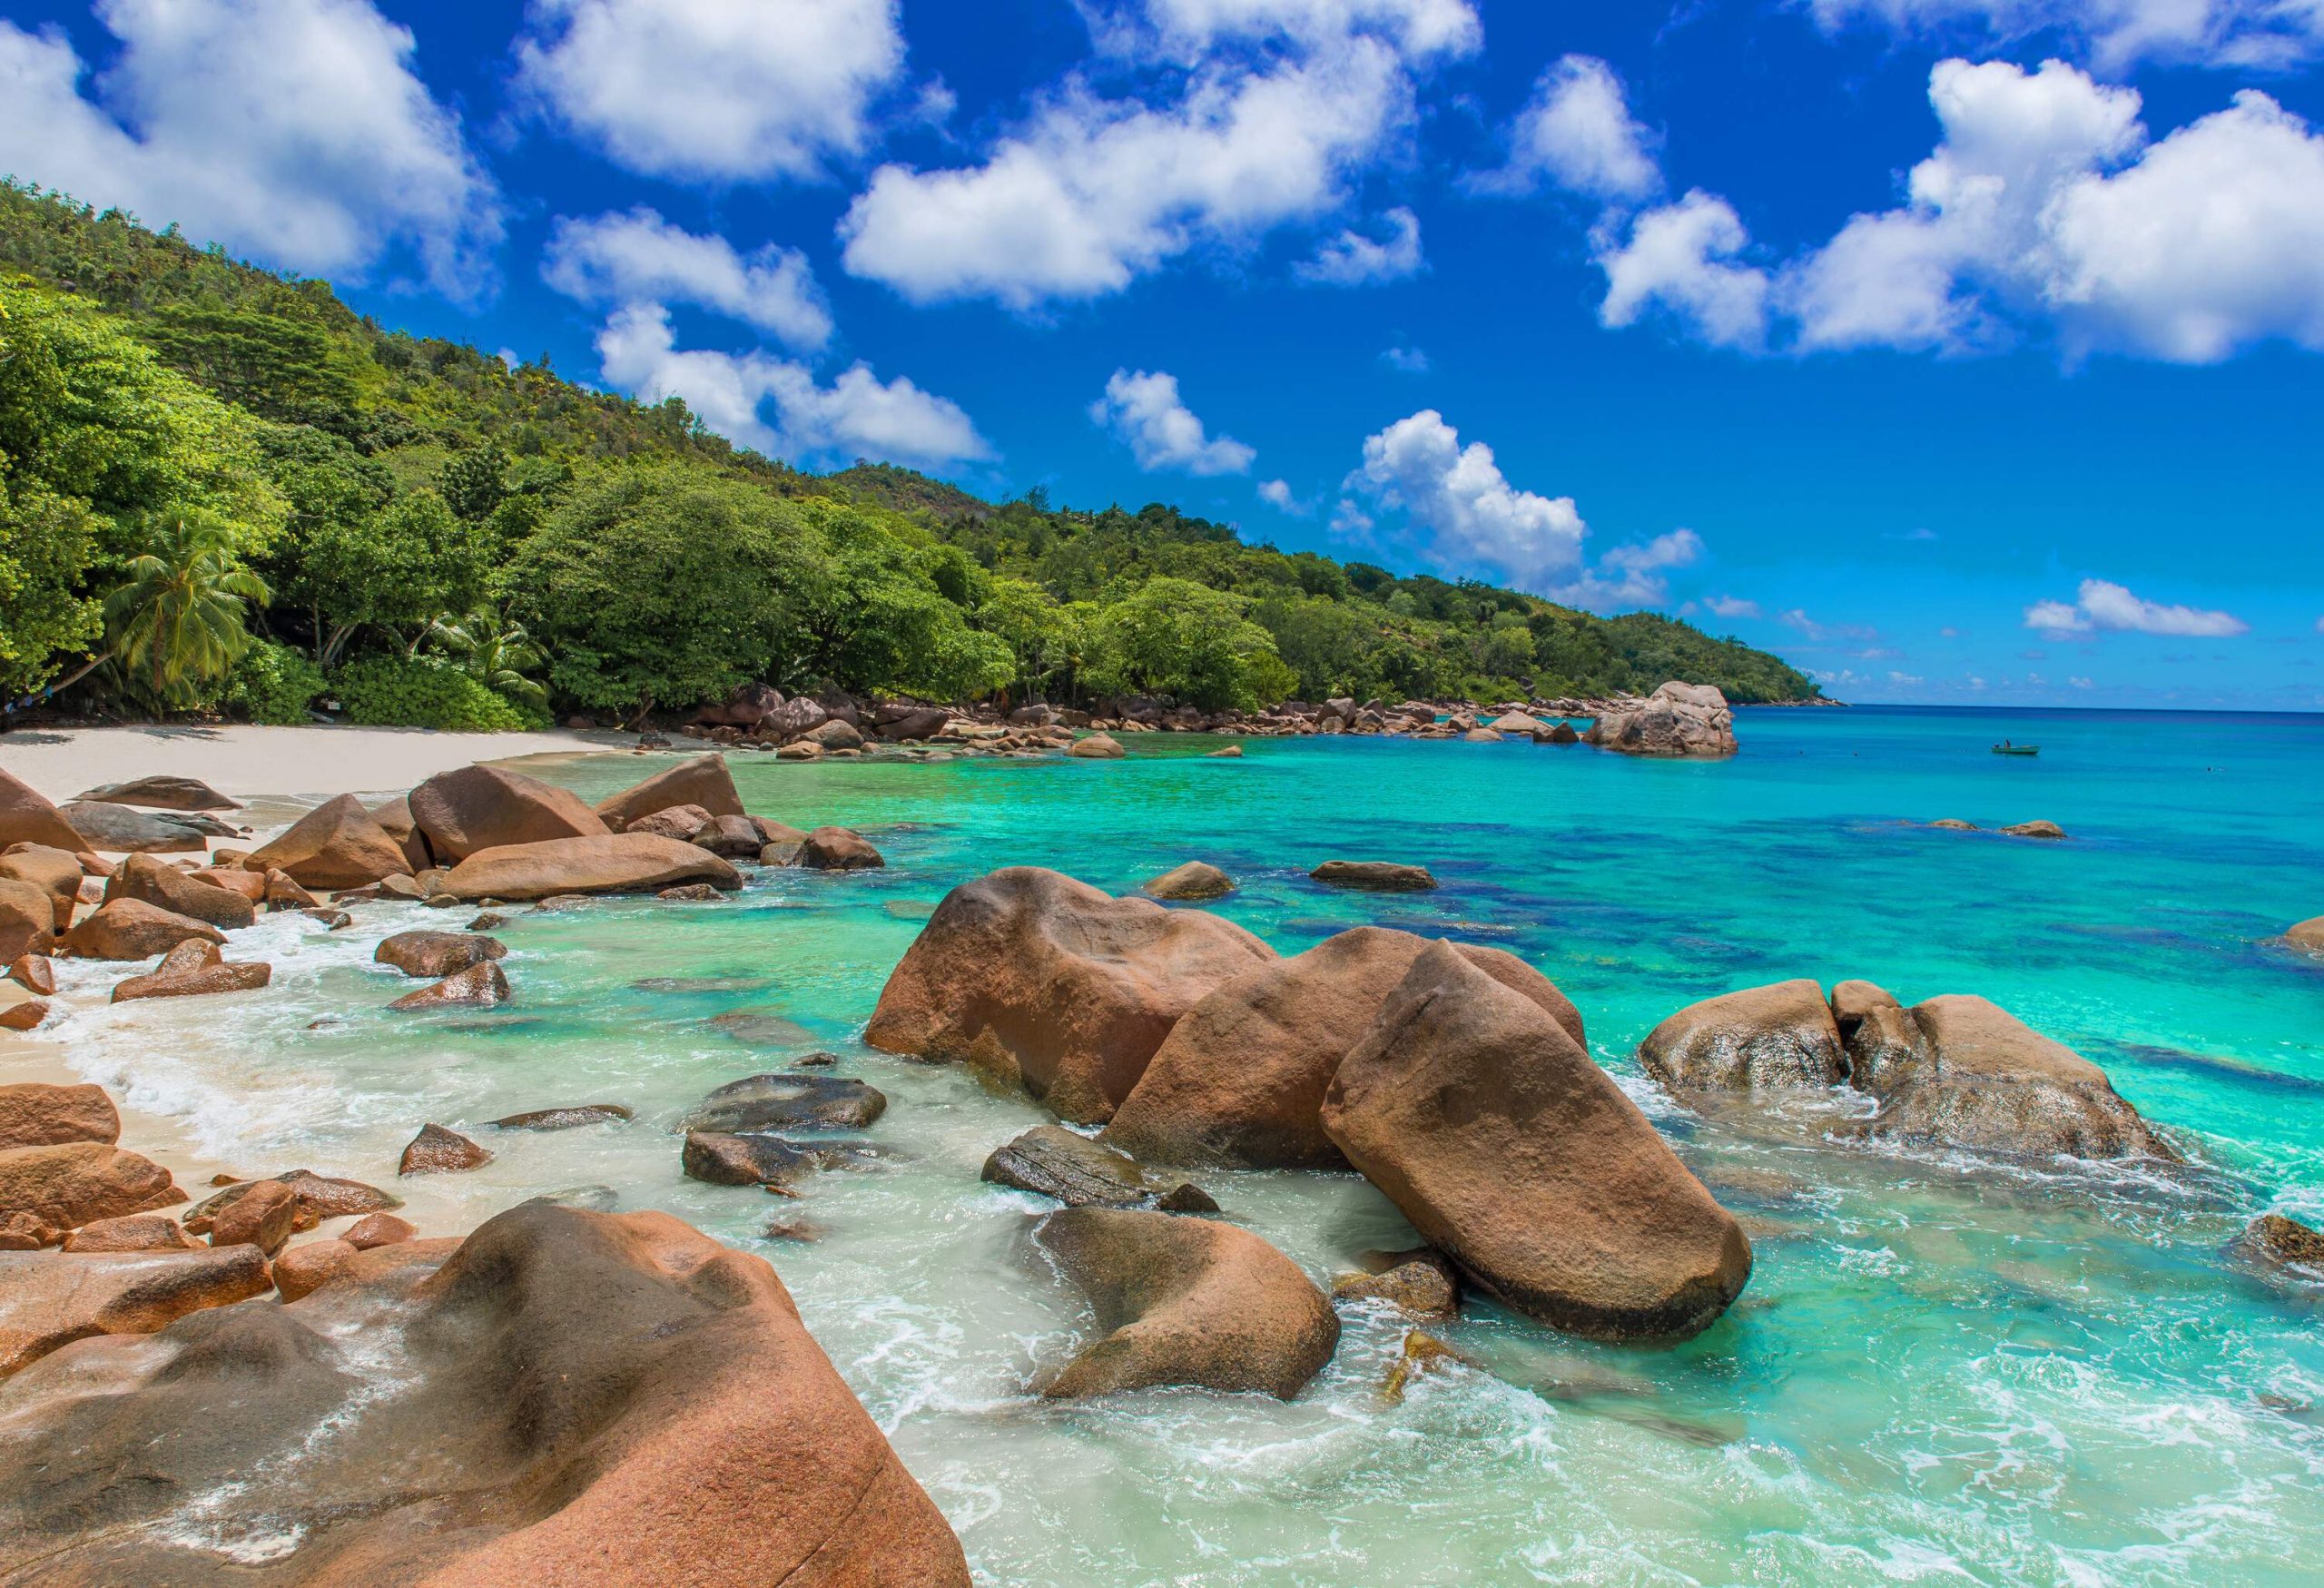 A rocky beach with tranquil turquoise water lies alongside a lushly forested mountain.